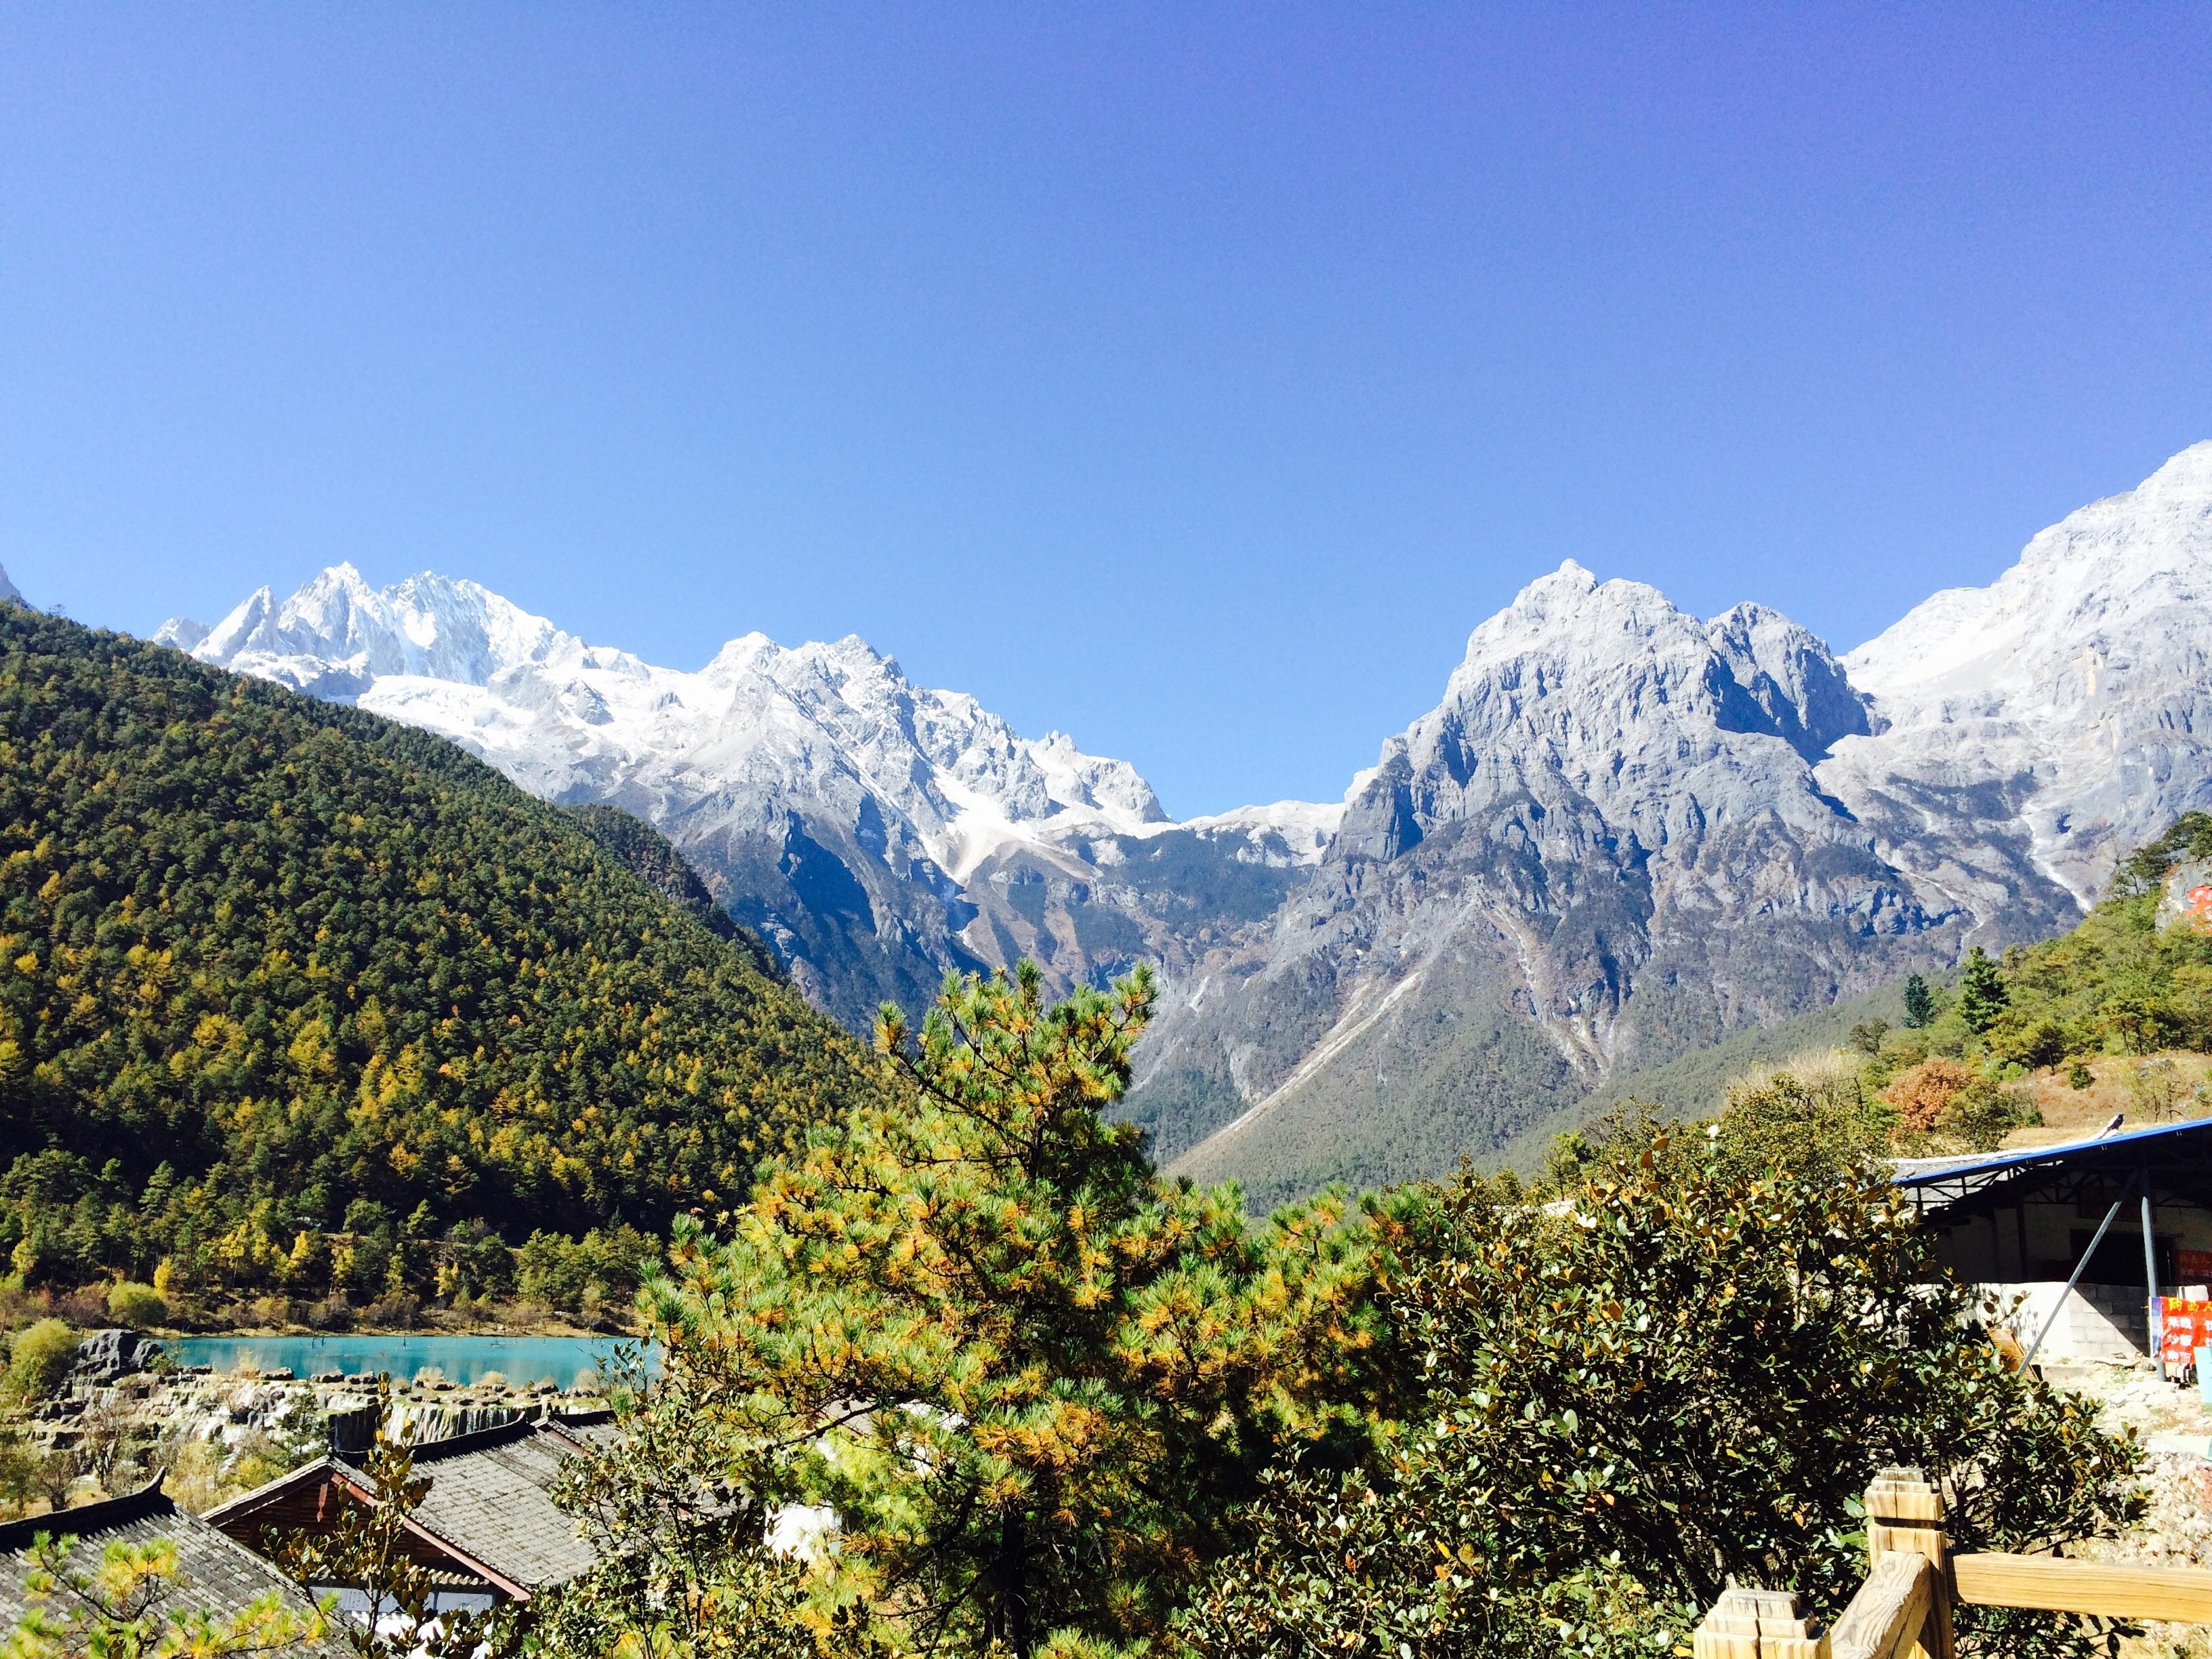 Yulong Snow Mountain and Glacier Park - All You Need to Know